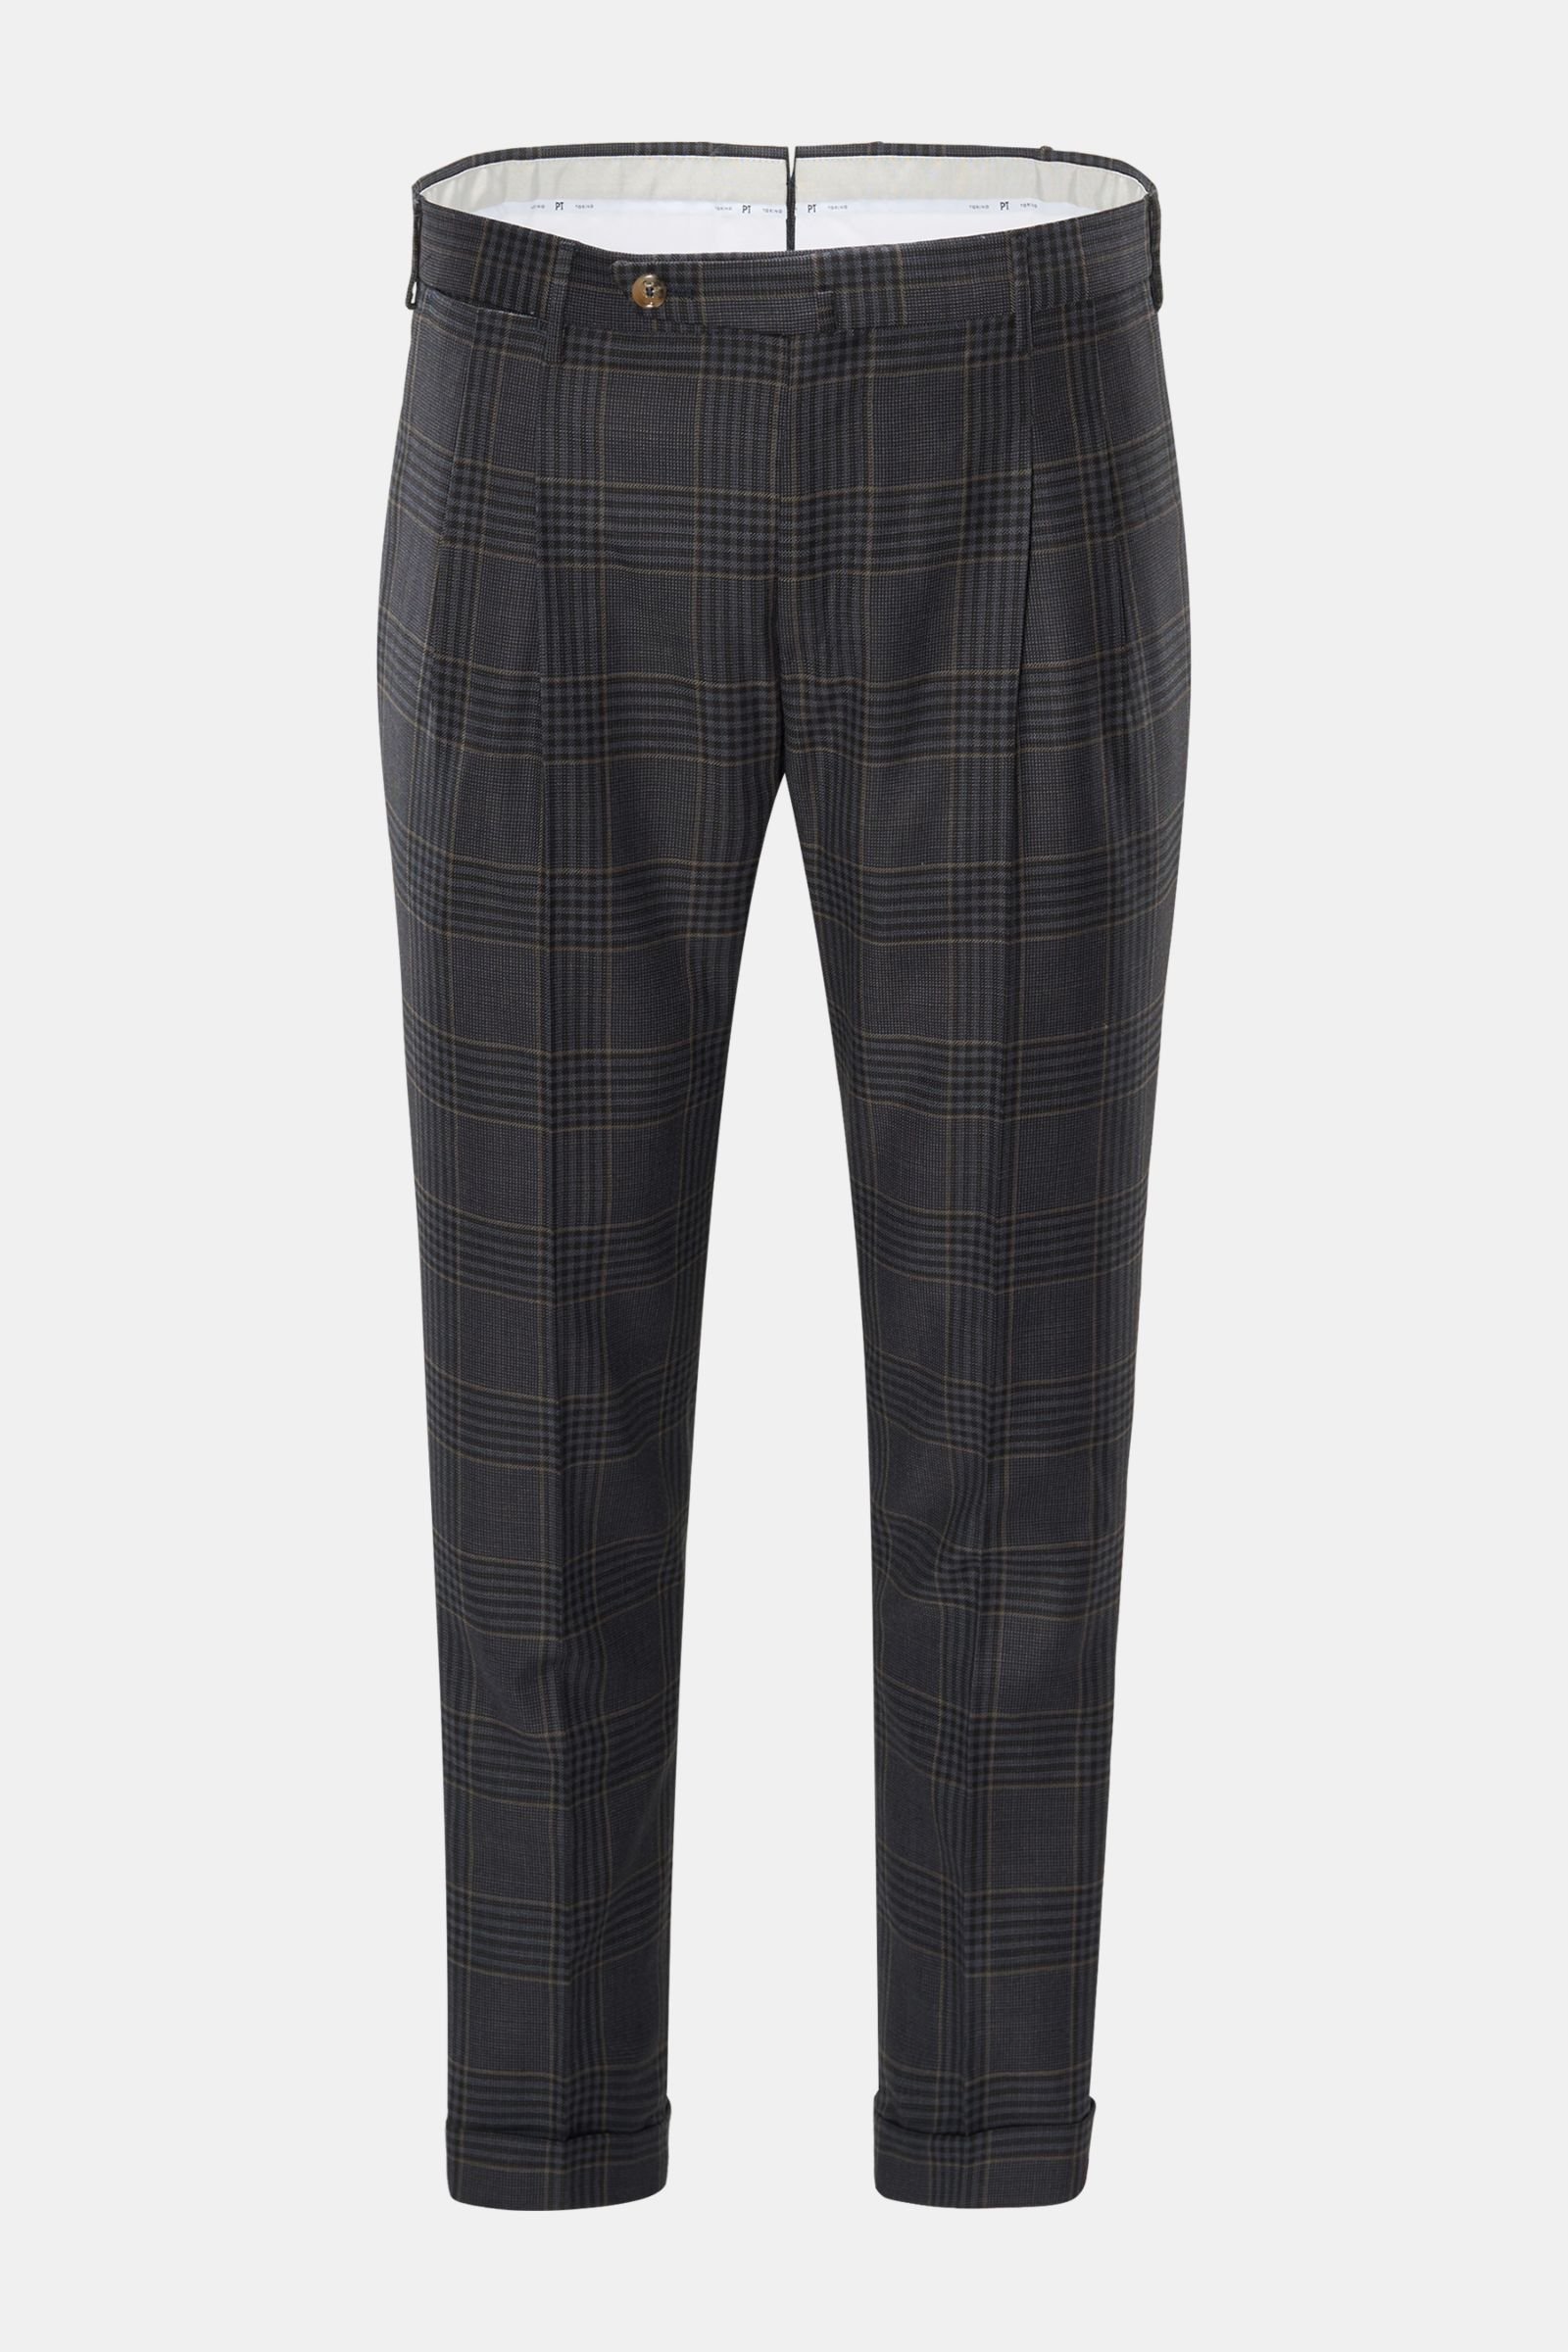 Wool trousers 'Preppy Fit' grey-blue/black checked